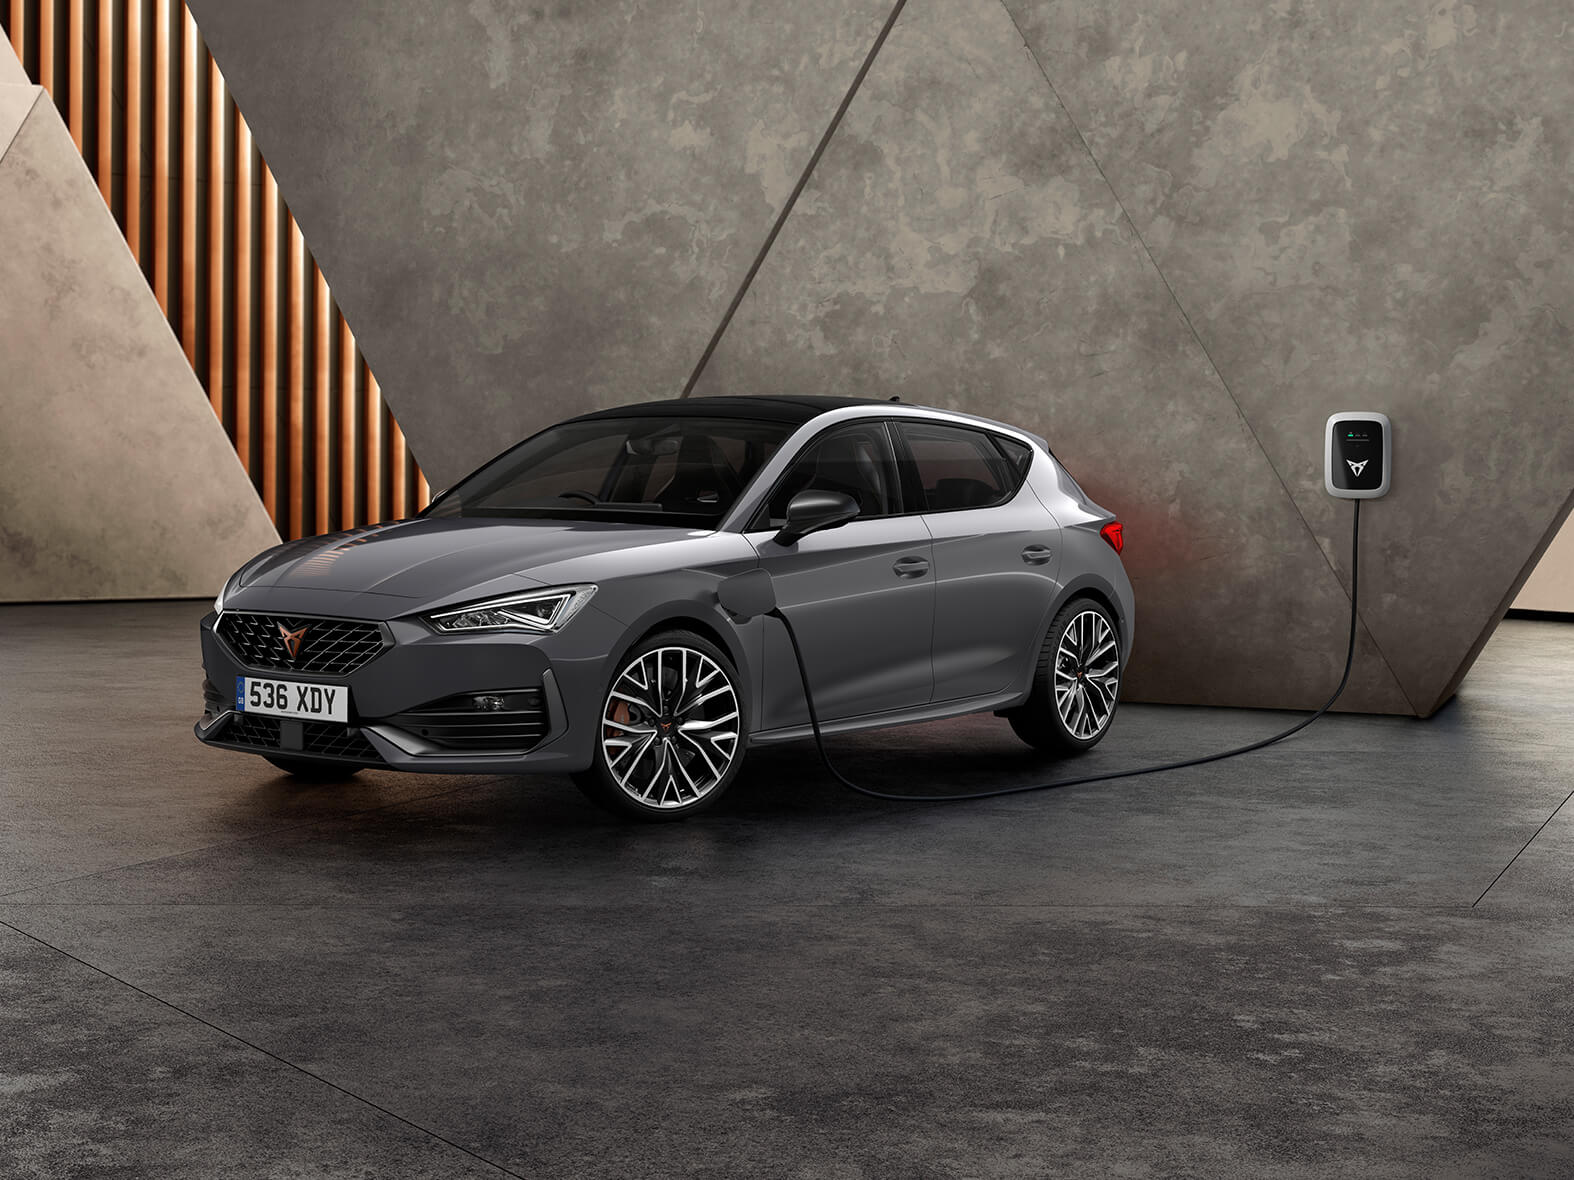 Cupra Leon e hybrid in grey plugged into wall charger